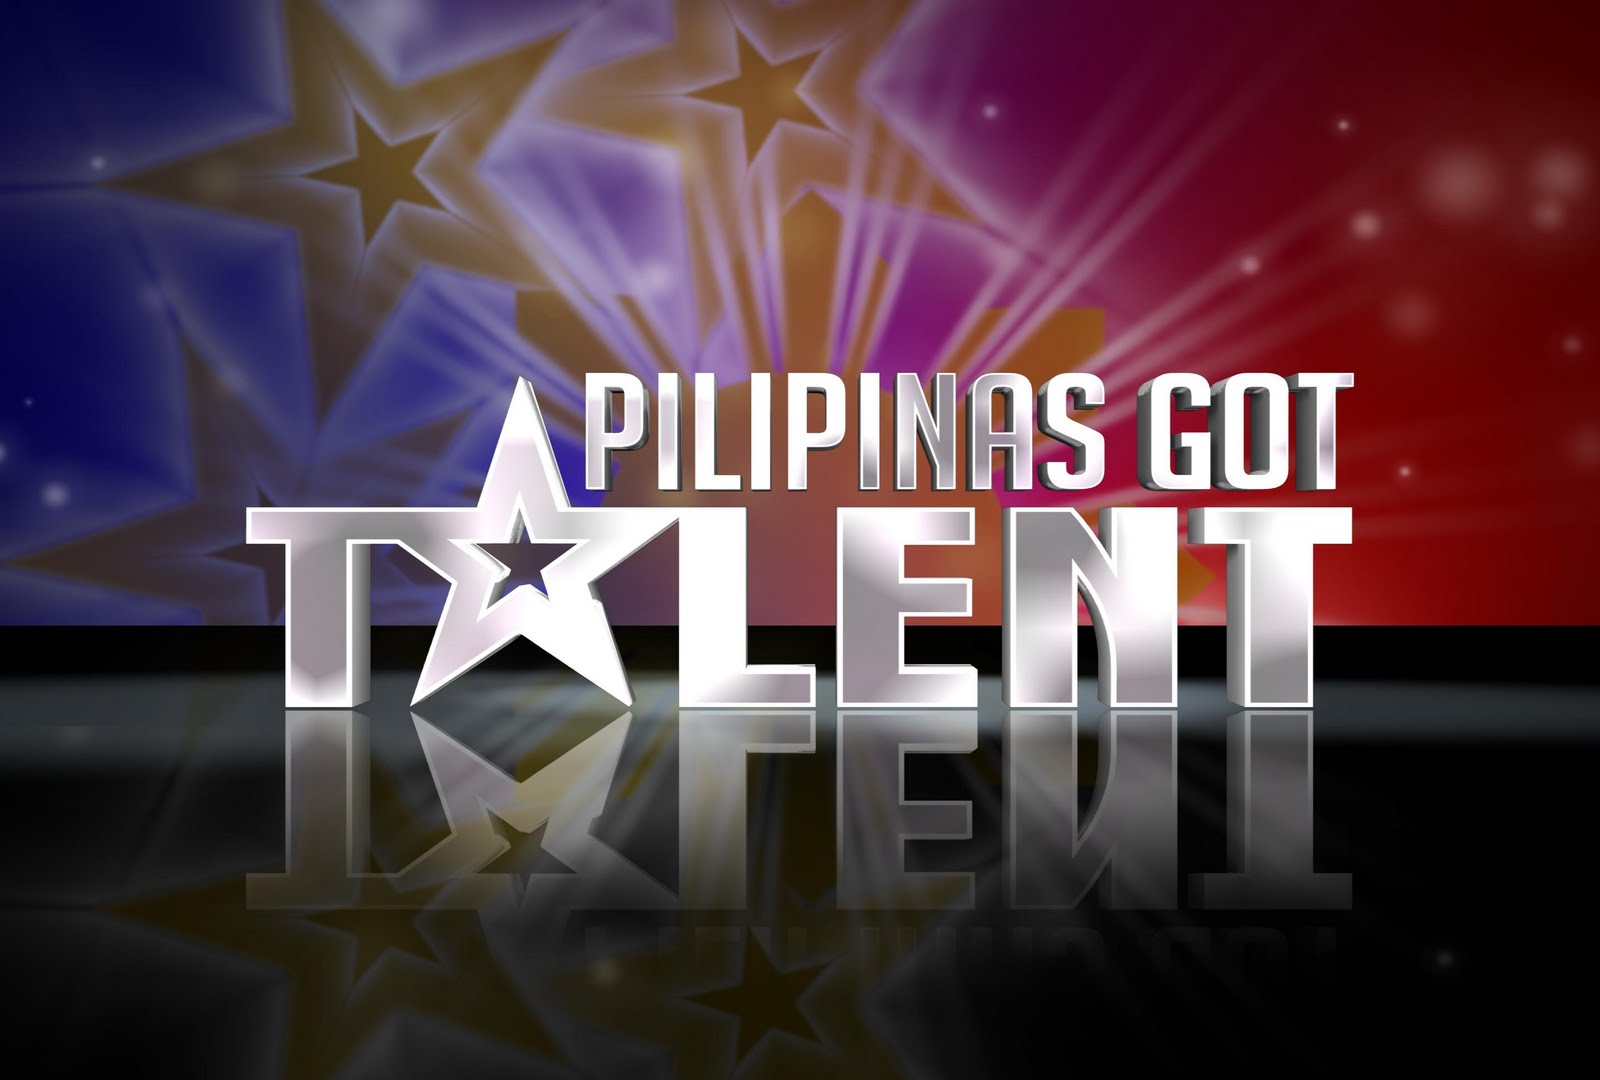  ... Siblings of Cainta enter “Pilipinas Got Talent” final round